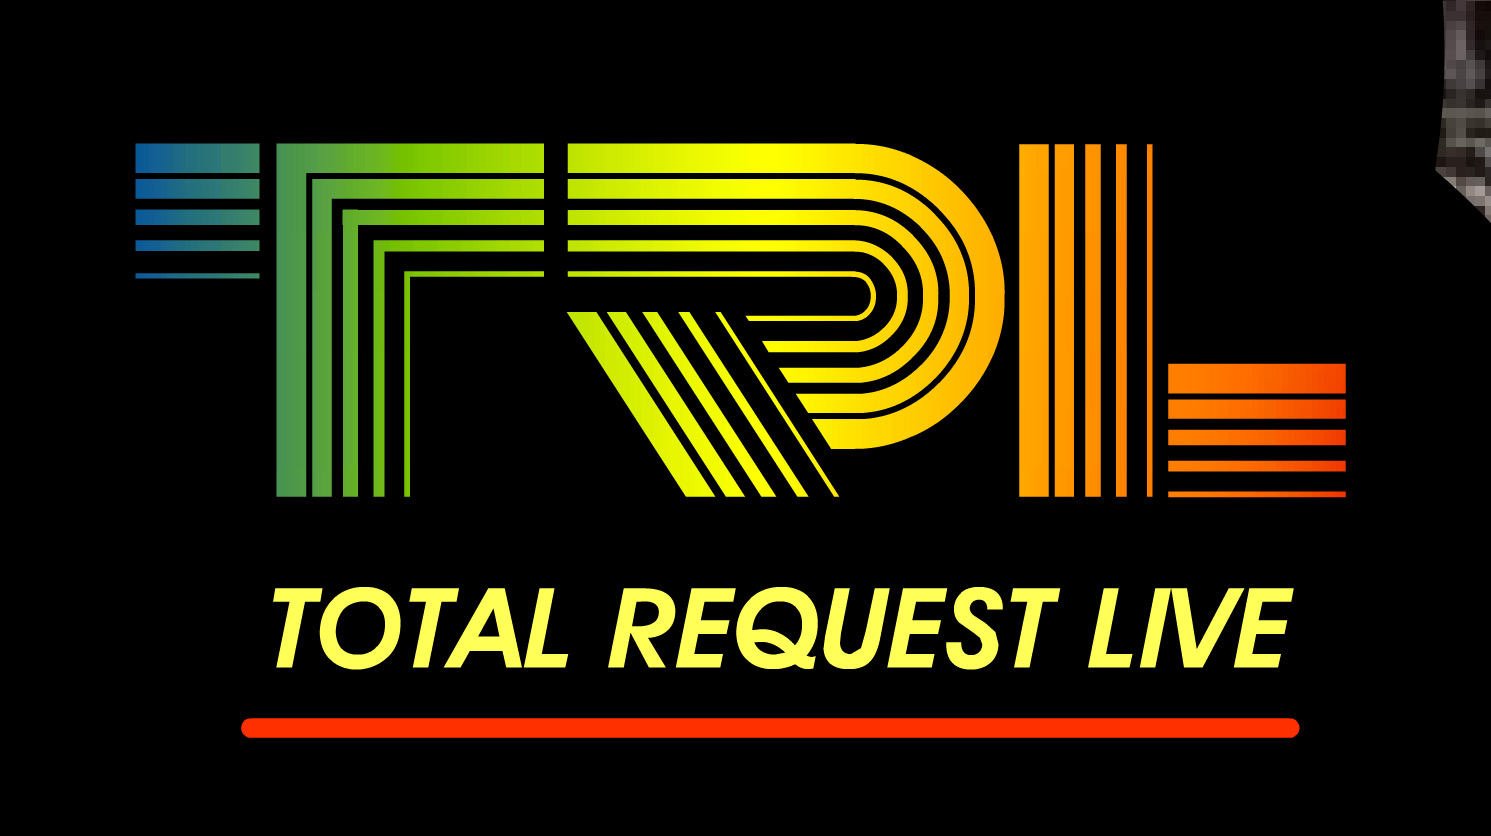 When Does Total Request Live Season 2 Start On MTV? Premiere Date